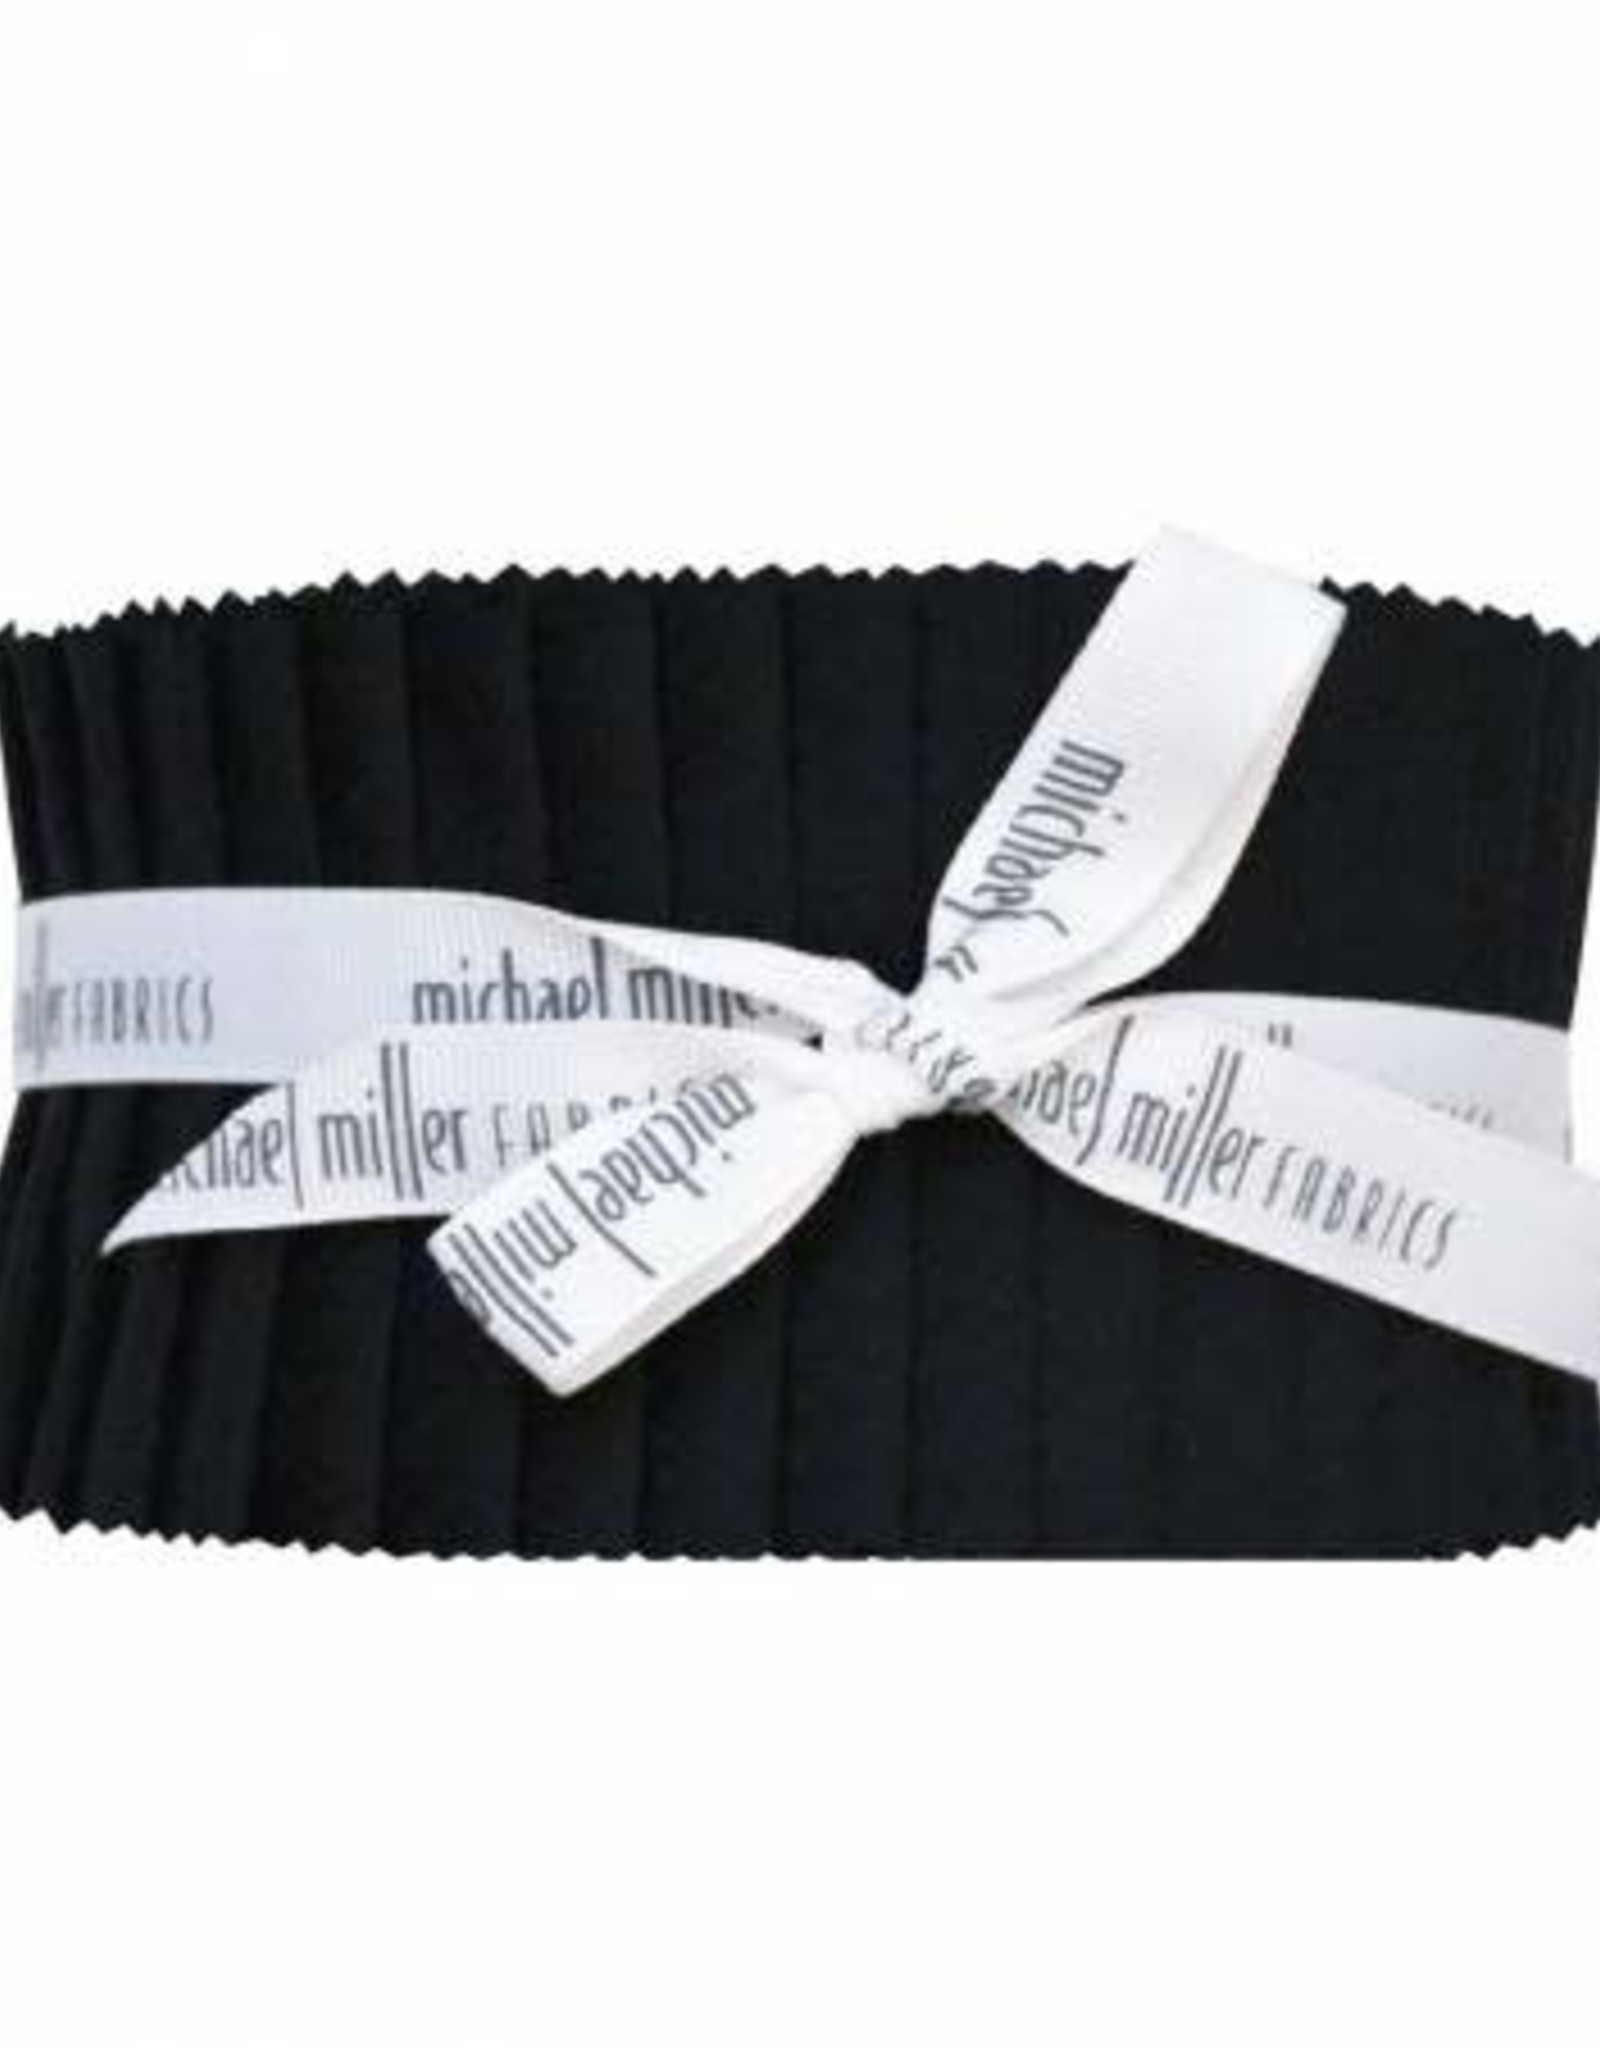 Cotton Couture Solid Black Jelly Roll